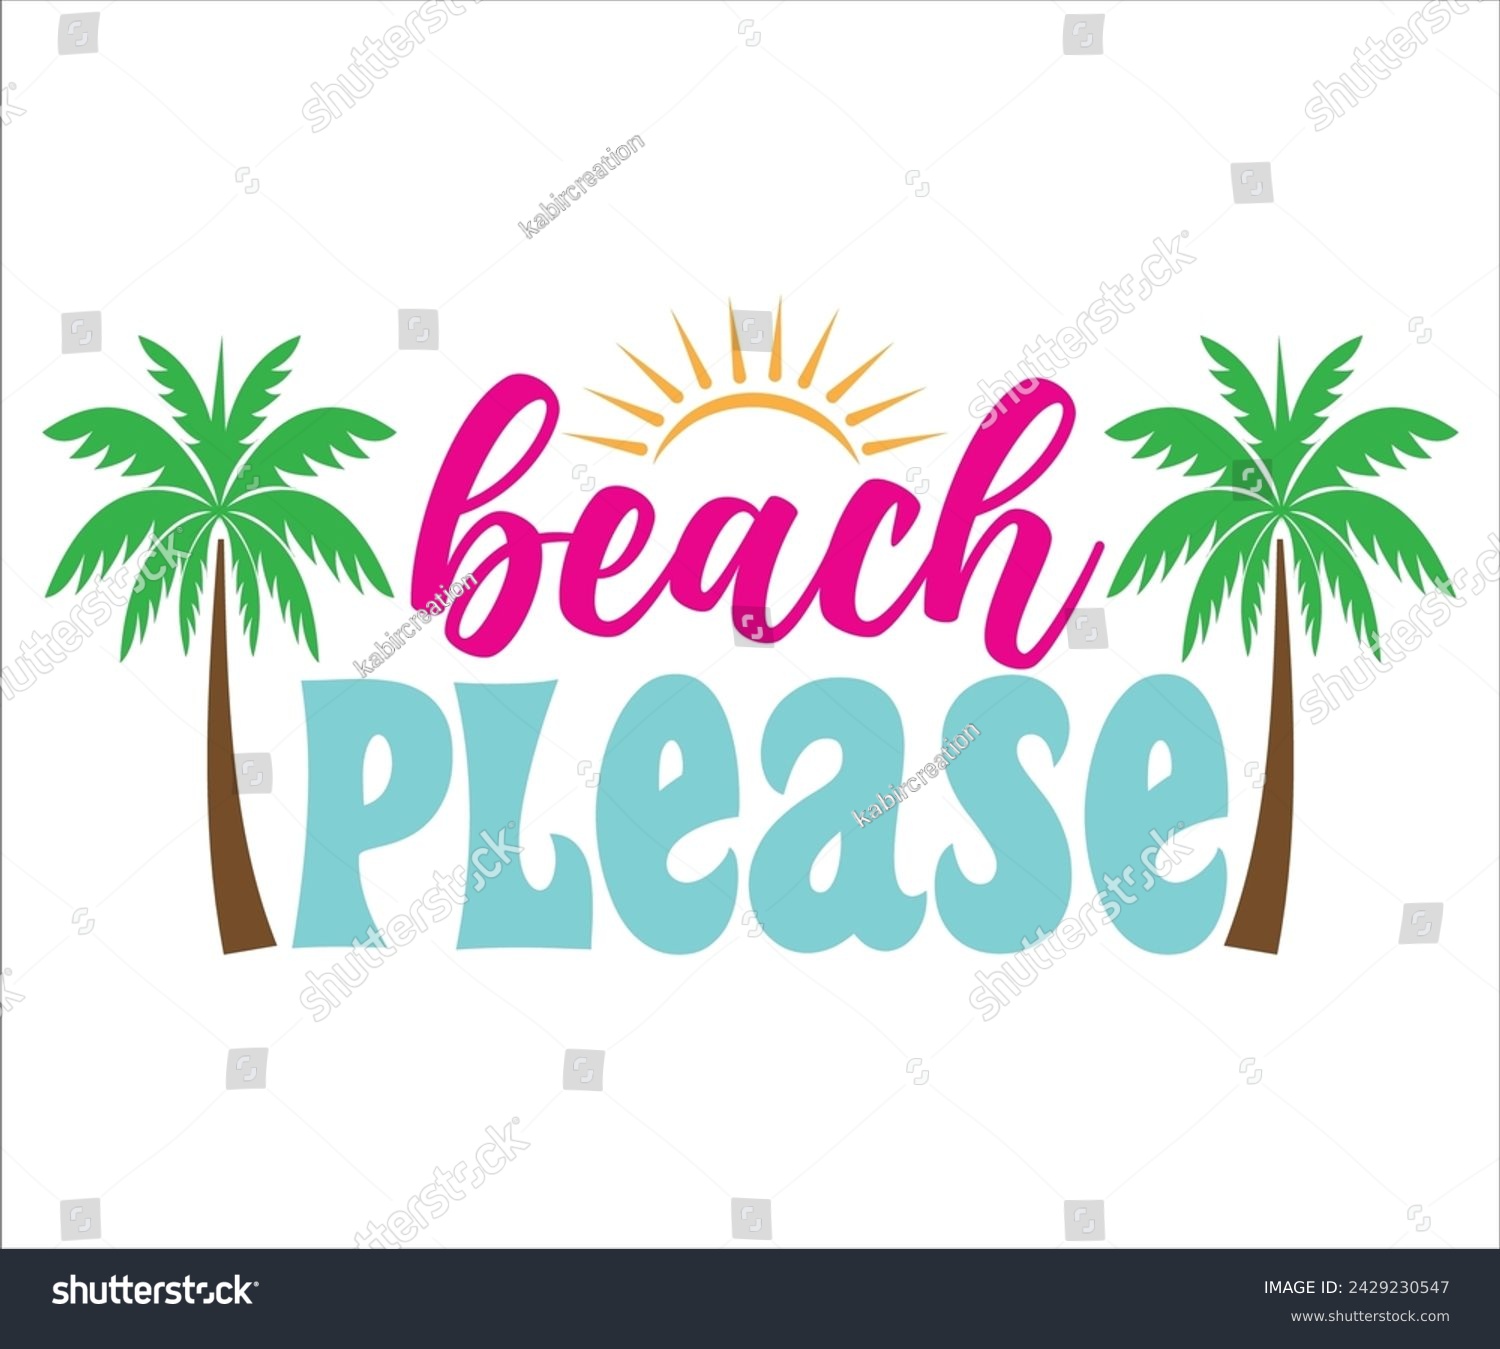 SVG of Beach Please T-shirt, Happy Summer Day T-shirt, Happy Summer Day svg,Hello Summer Svg,summer Beach Vibes Shirt, Vacation, Cut File for Cricut svg